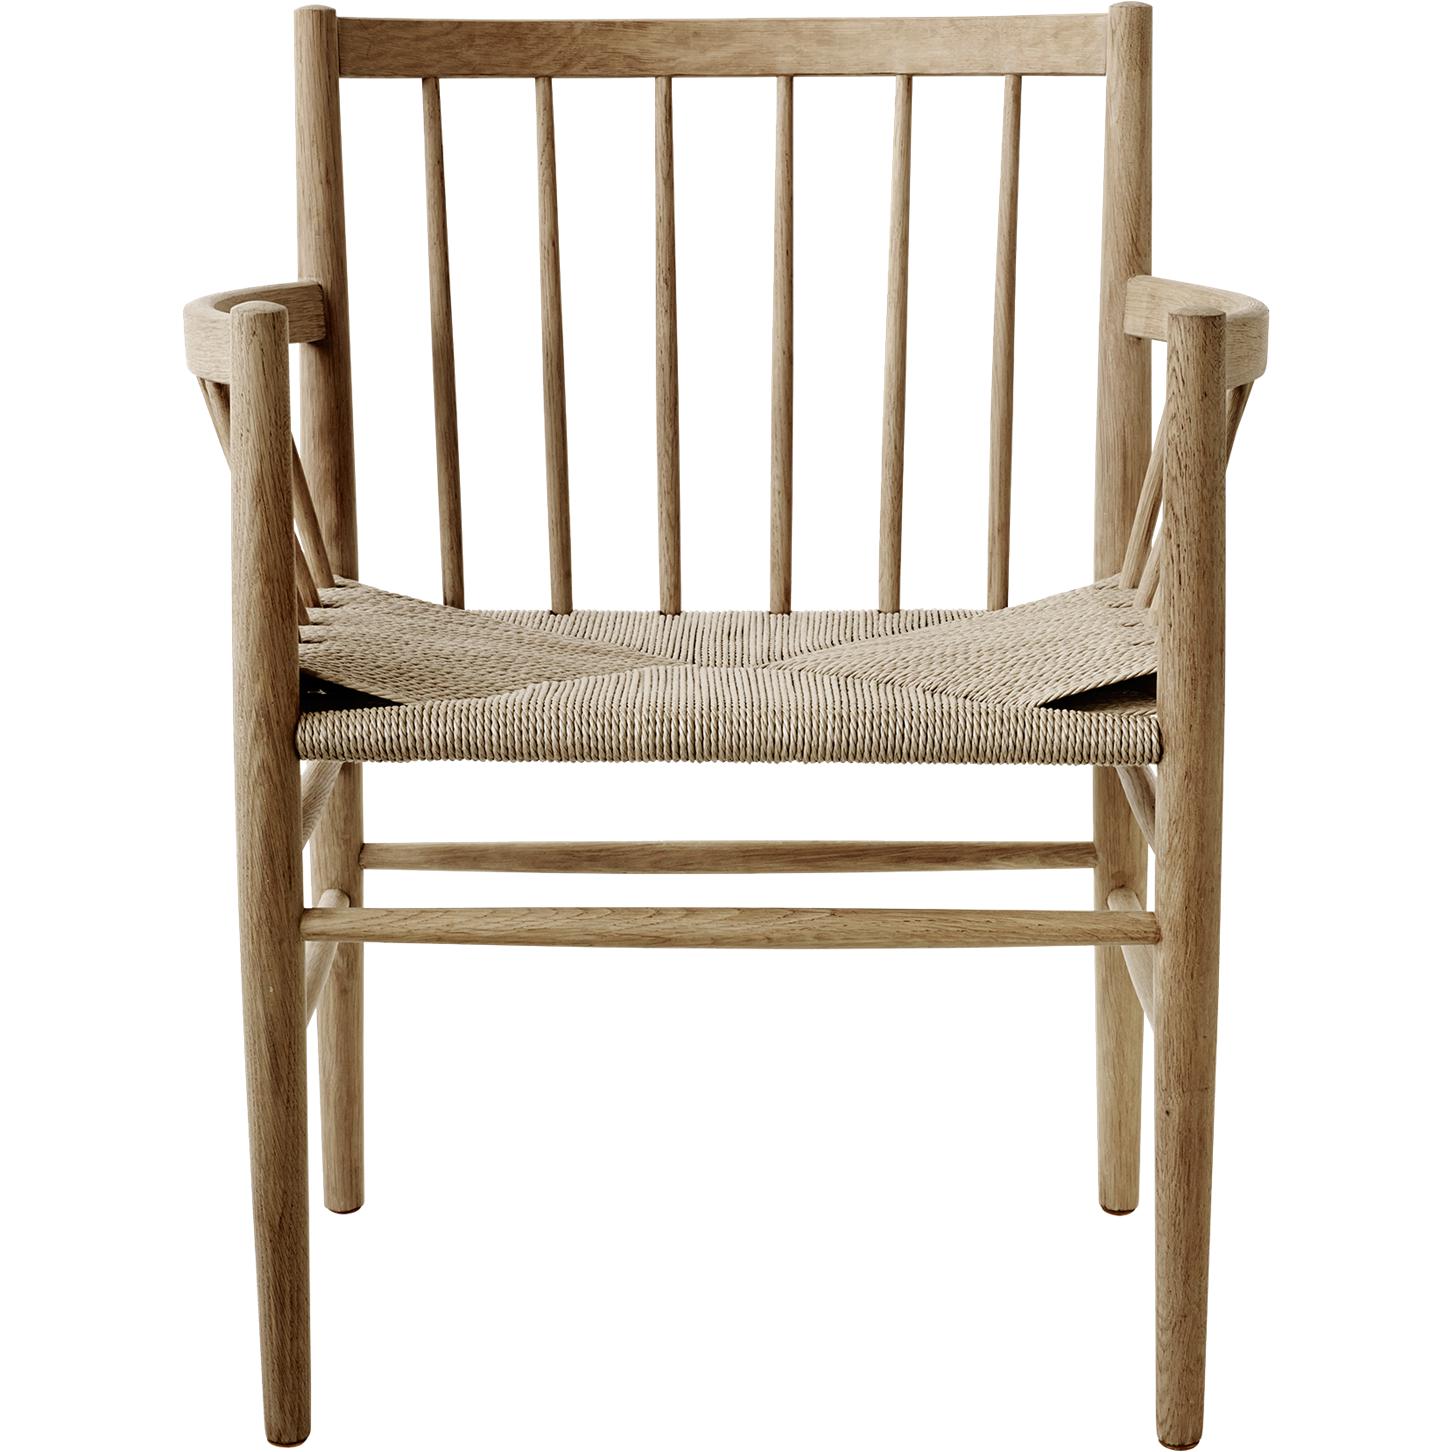 Fdb Møbler J81 Dining Chair With Armrest, Oak, Natural Wicker